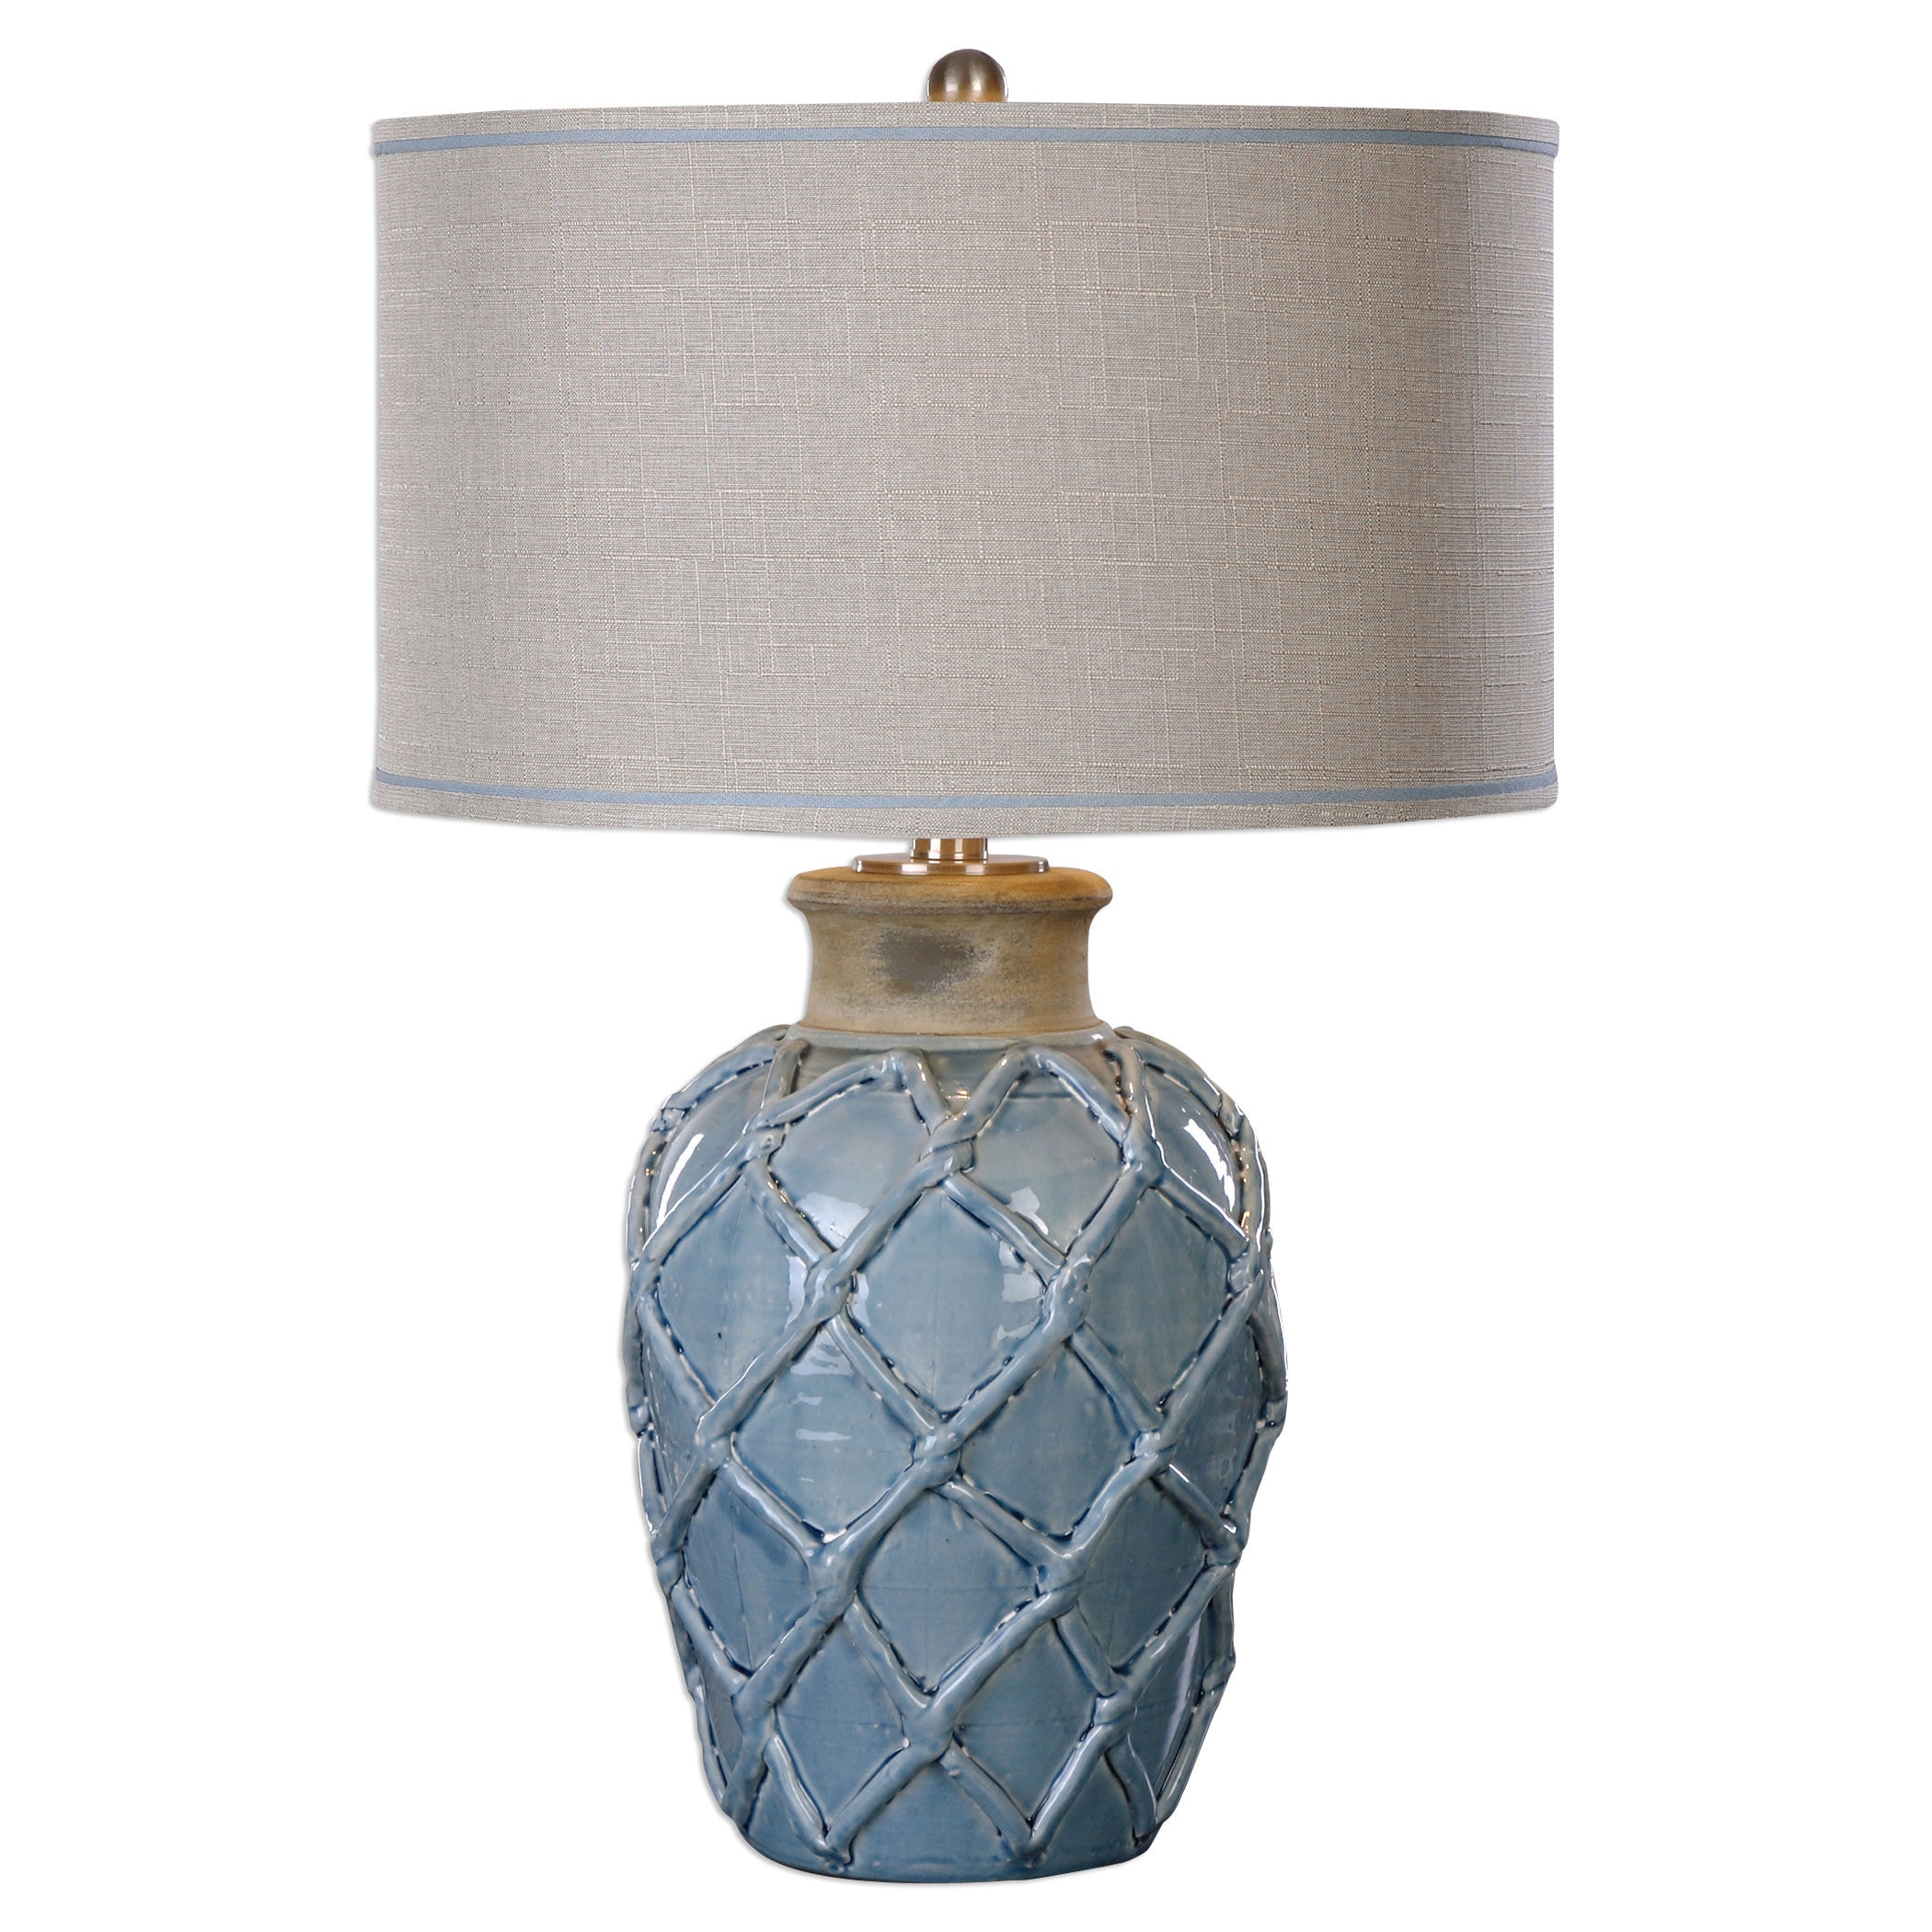 Blue Uttermost 26191-1 Hagano Glass Table Lamp 